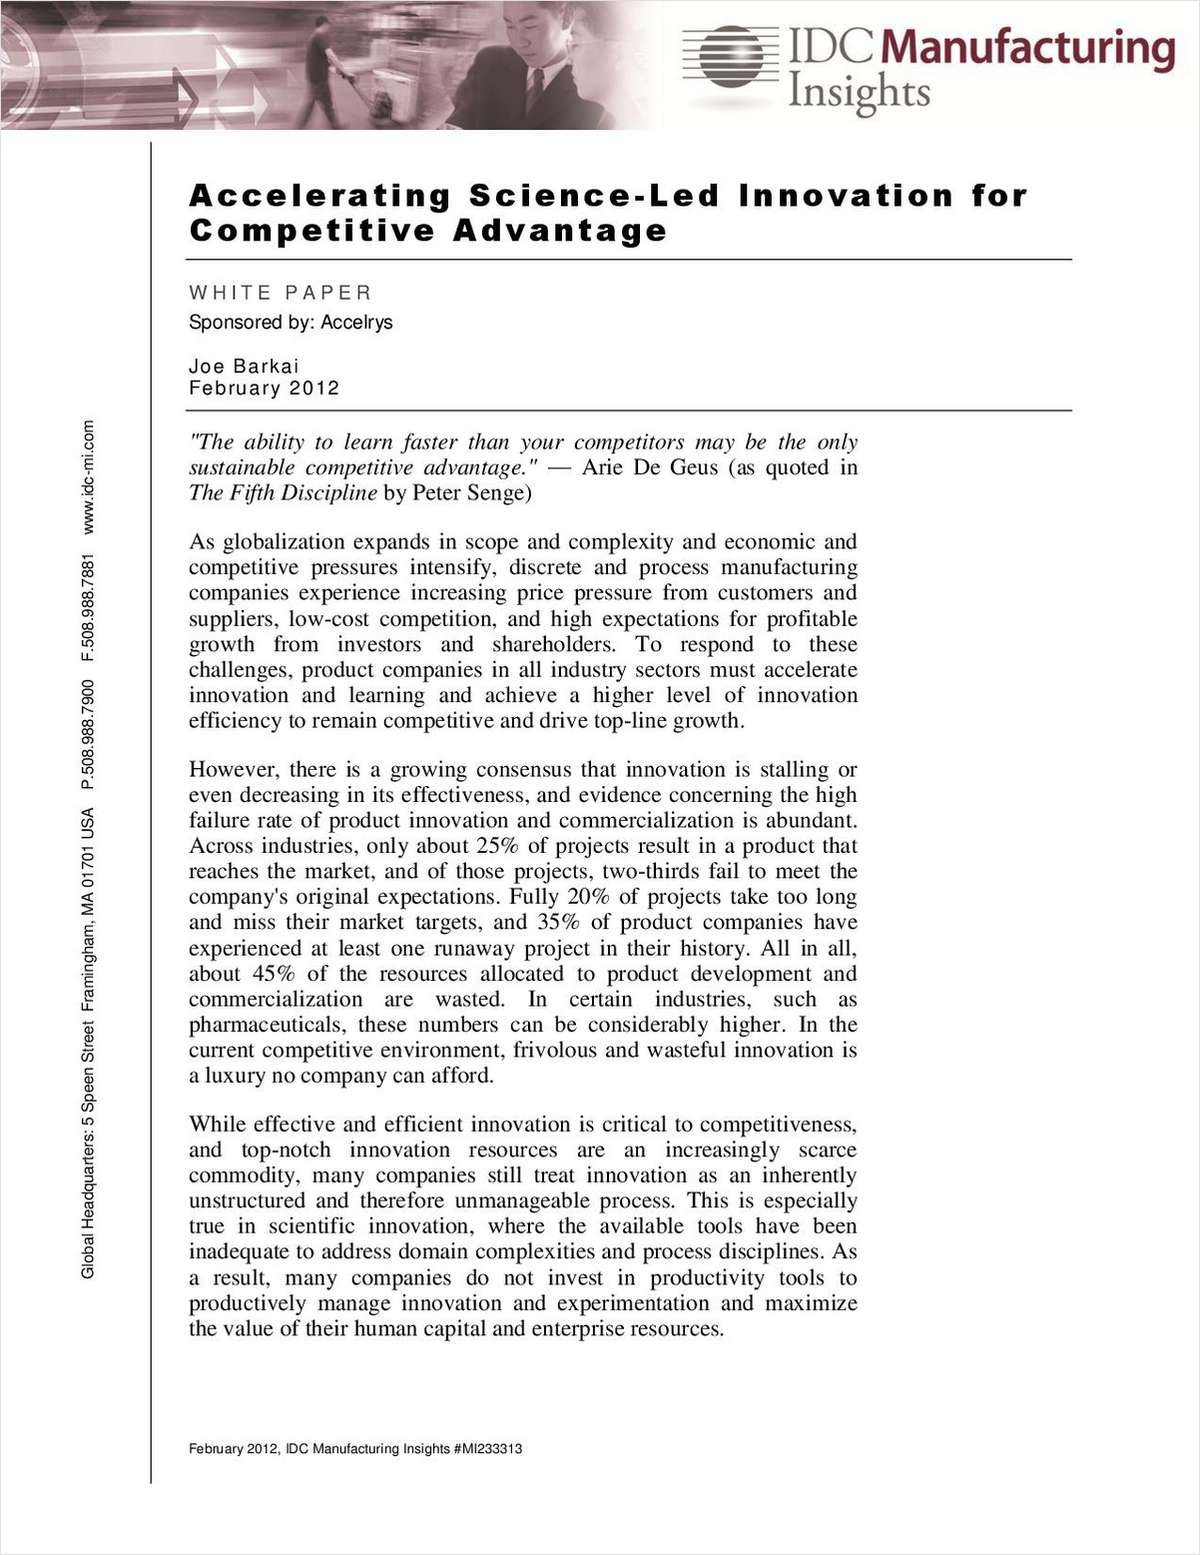 IDC Manufacturing Insights: Accelerating Science-Led Innovation for Competitive Advantage